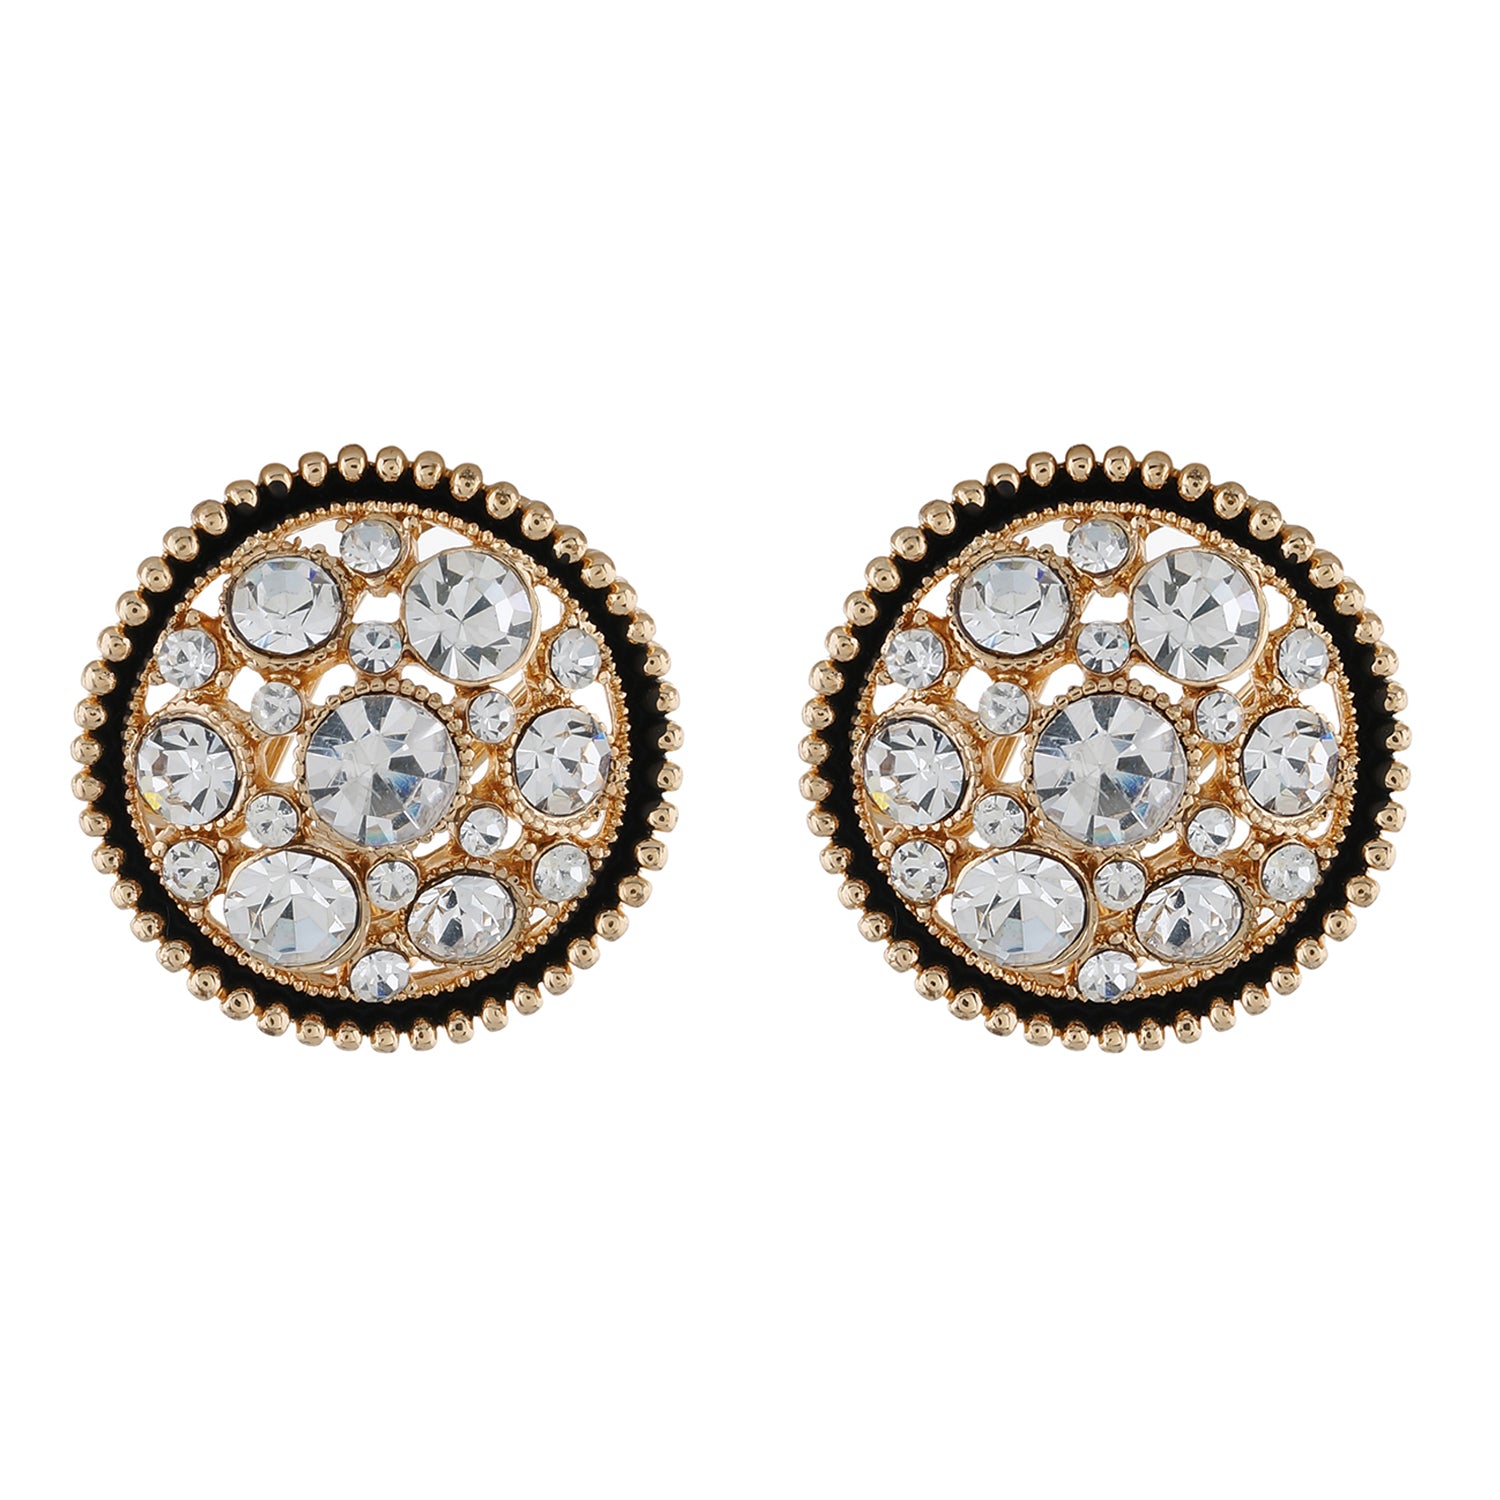 Gold colour Round Design Stud Earrings for Girls and Women